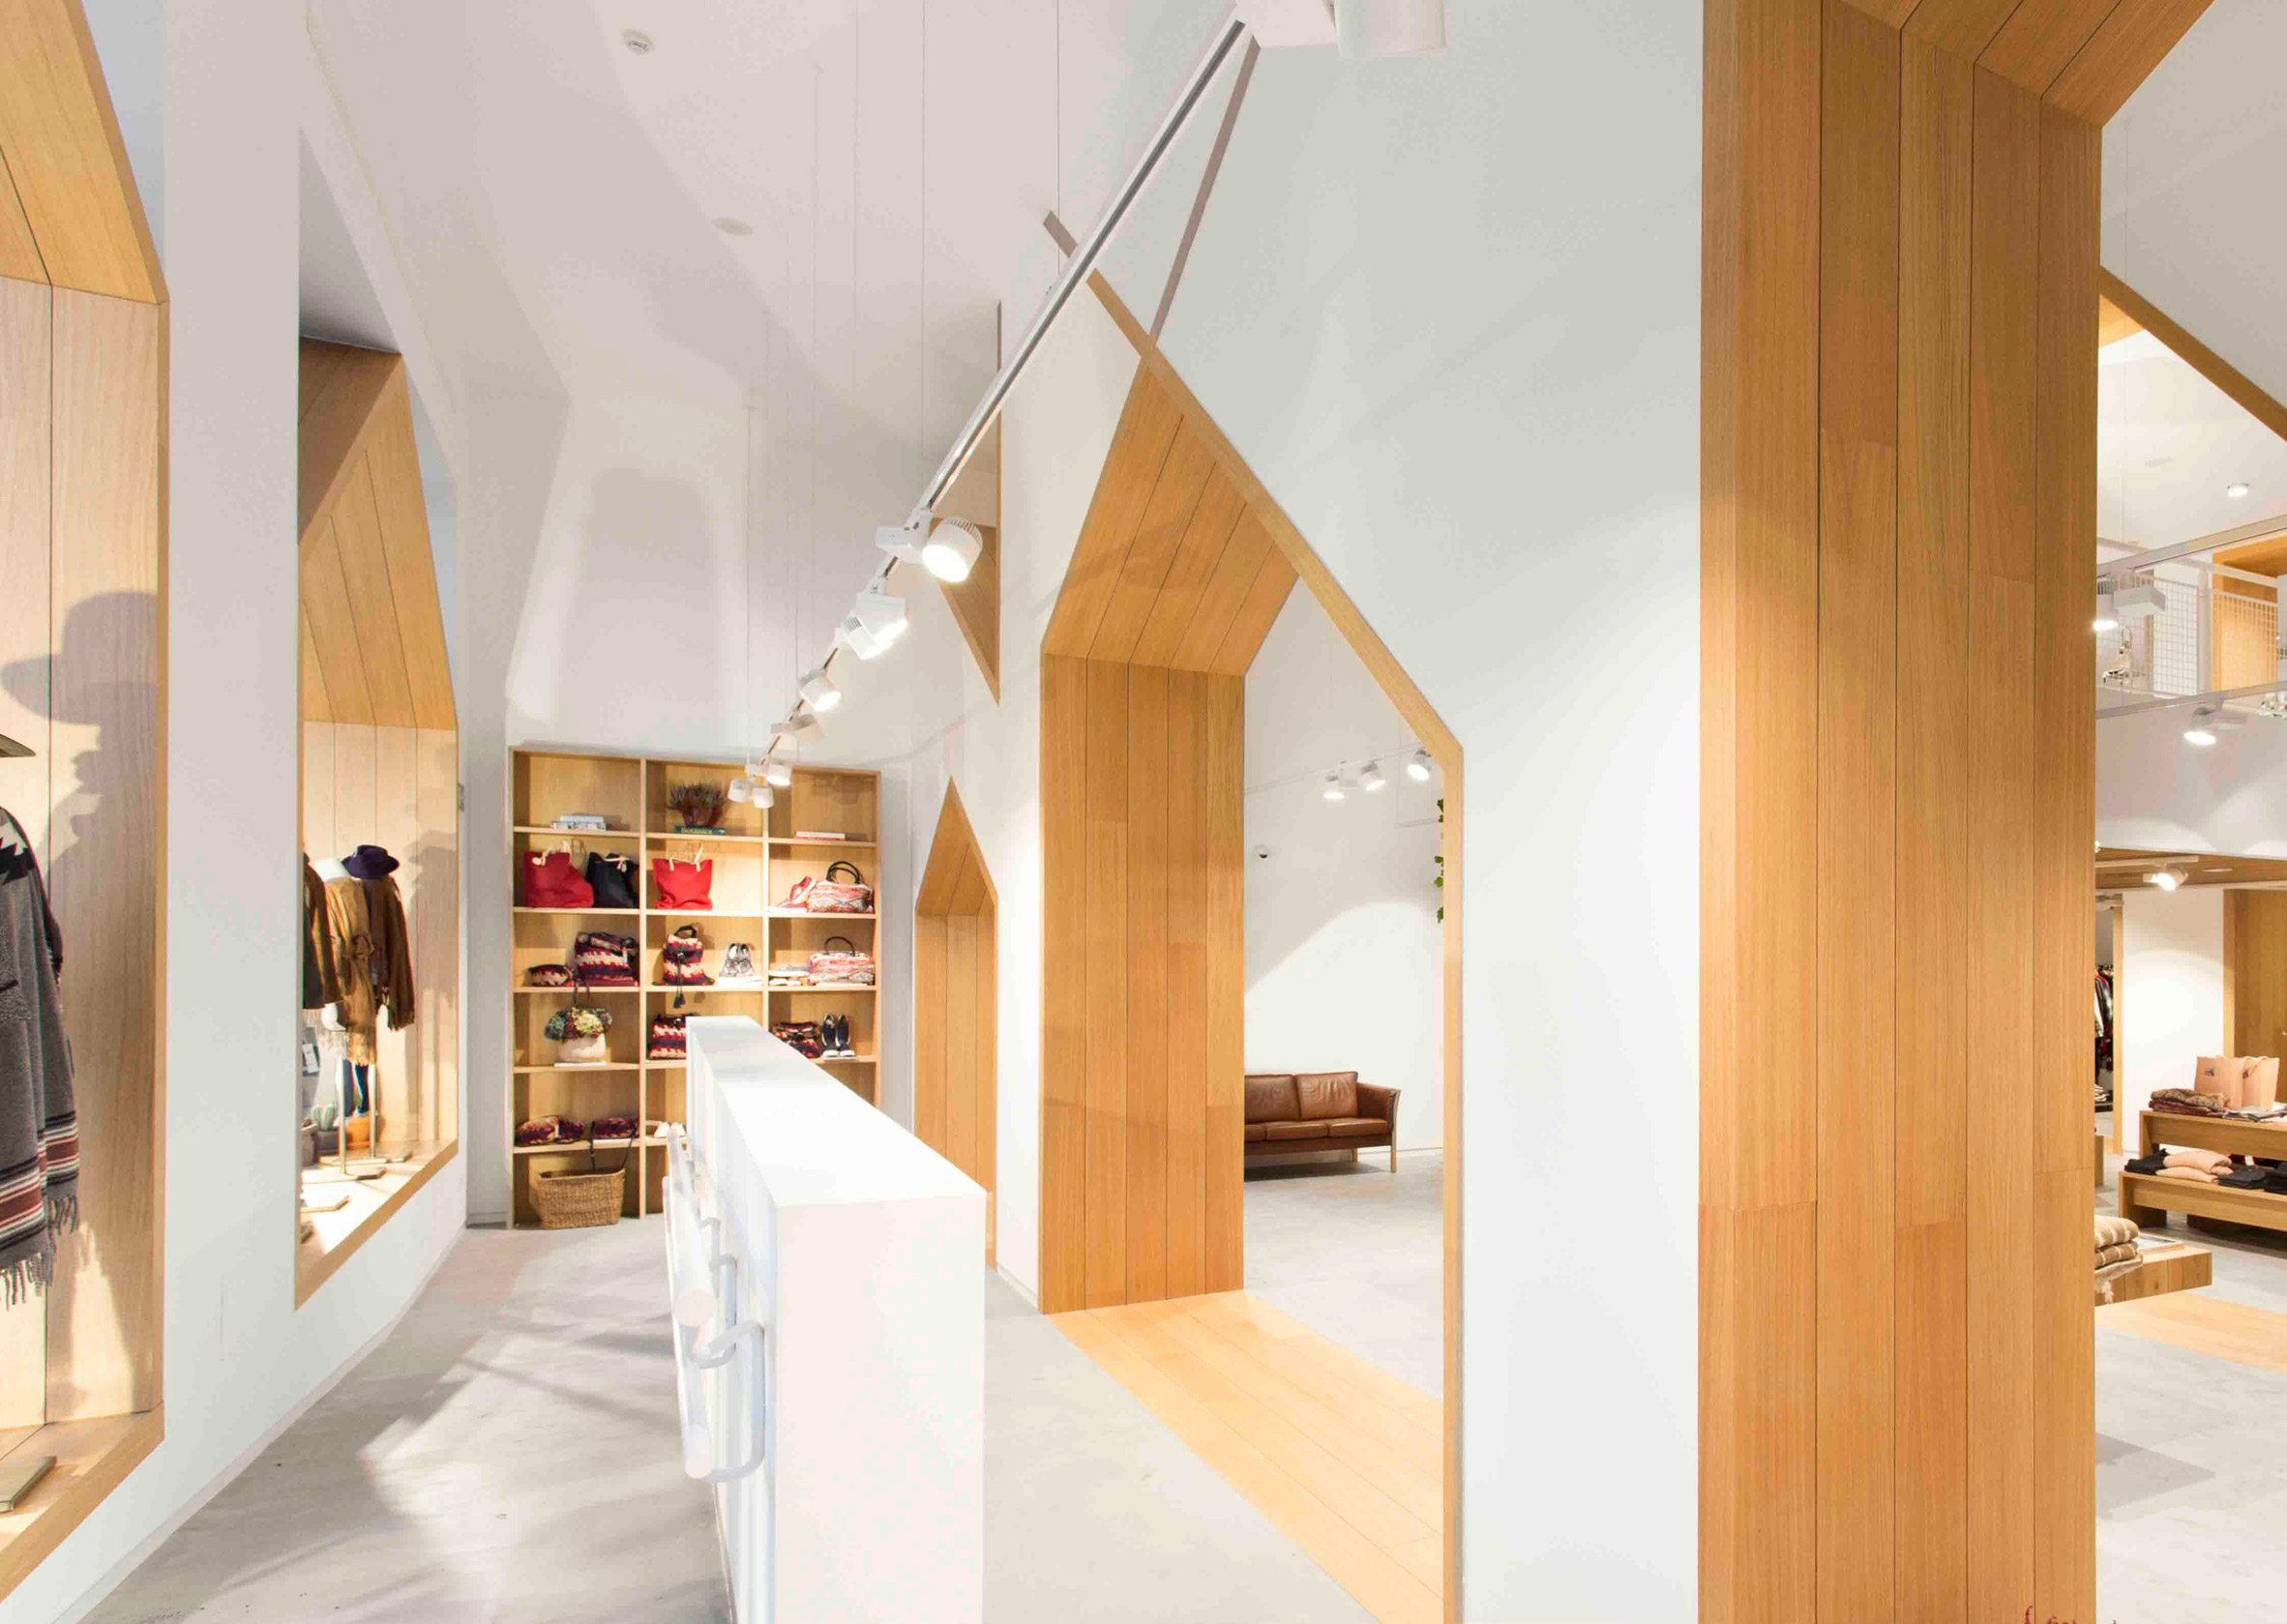 Pauzarq adds house-shaped archways to Sketch concept store in Spain